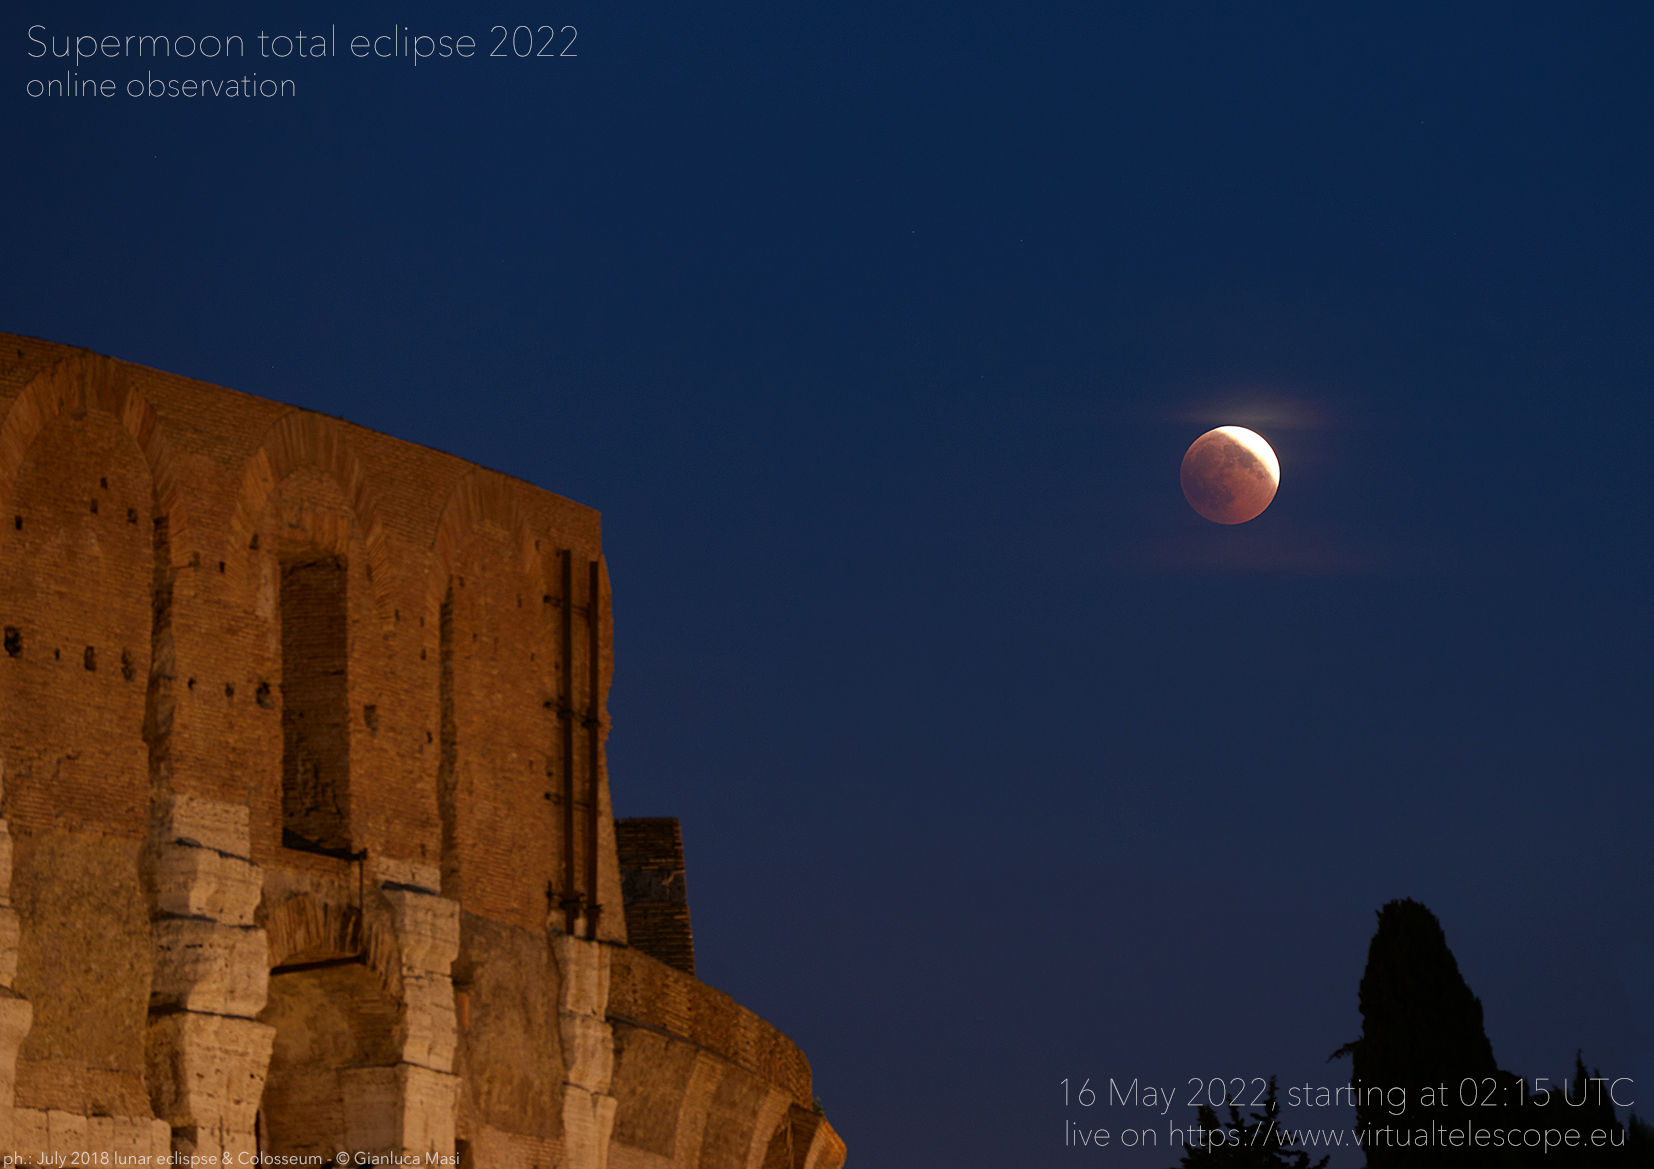 Supermoon total eclipse 2022: poster of the event.